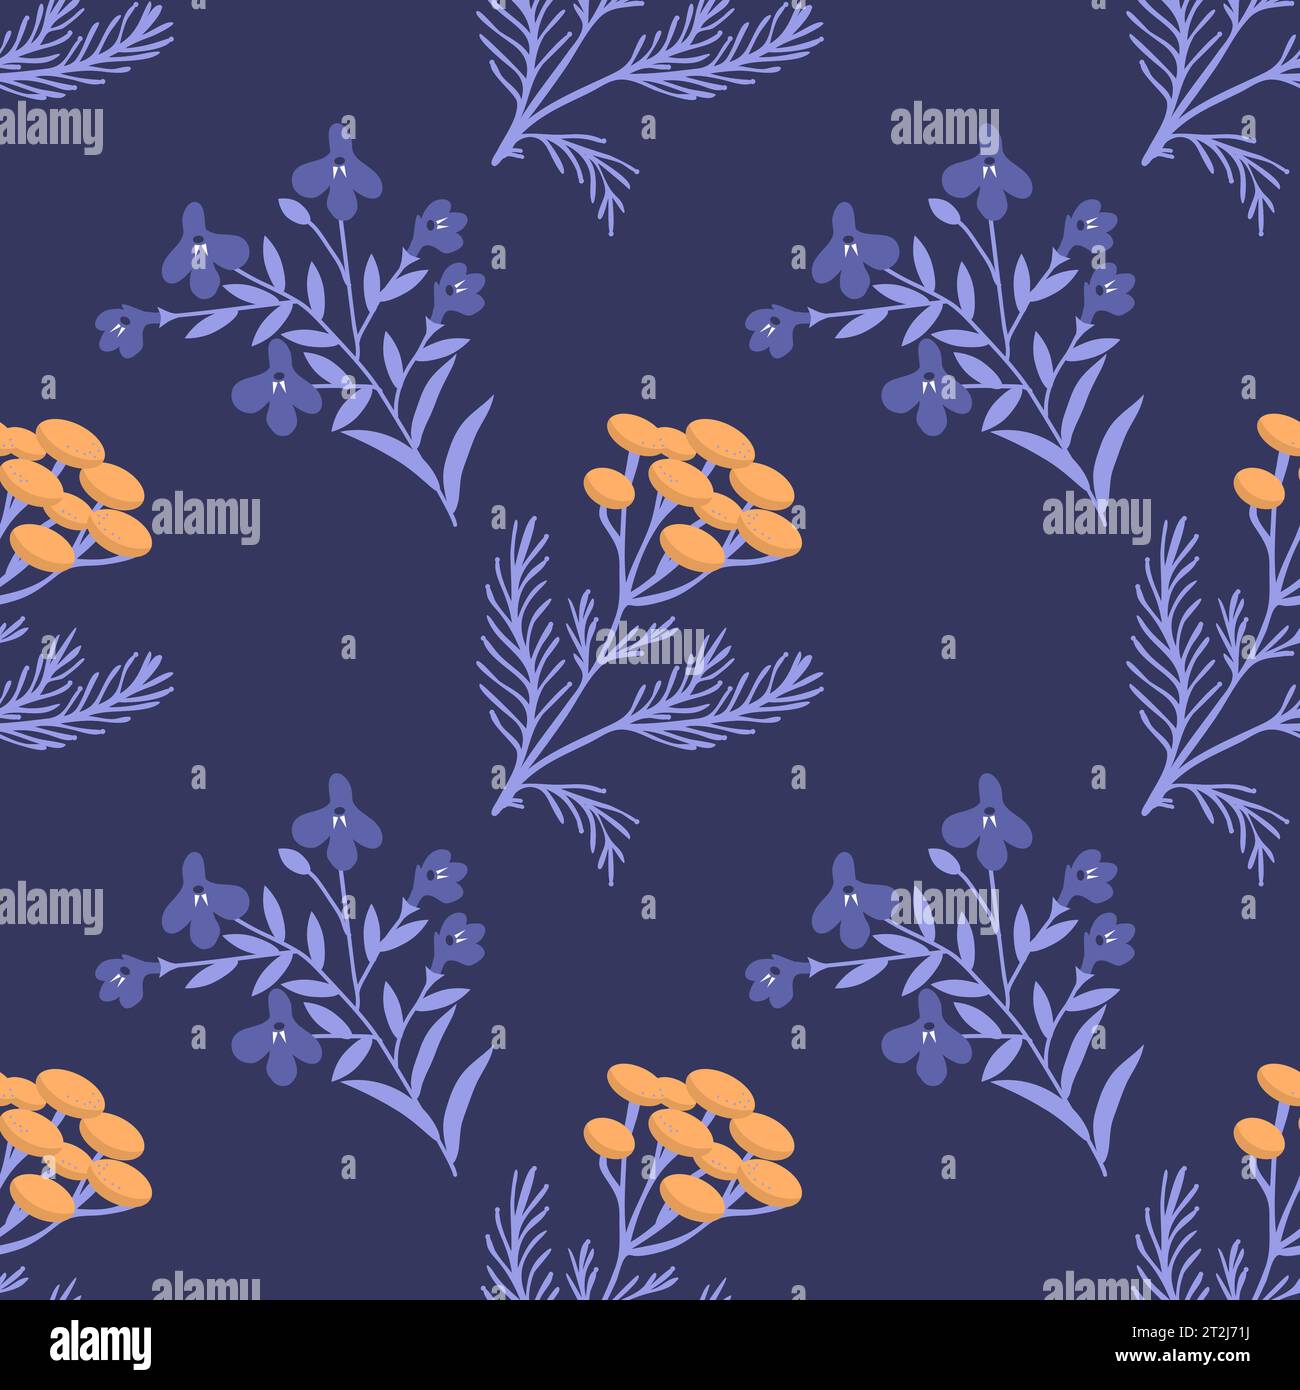 Seamless decorative floral tansy and lobelia pattern Stock Vector